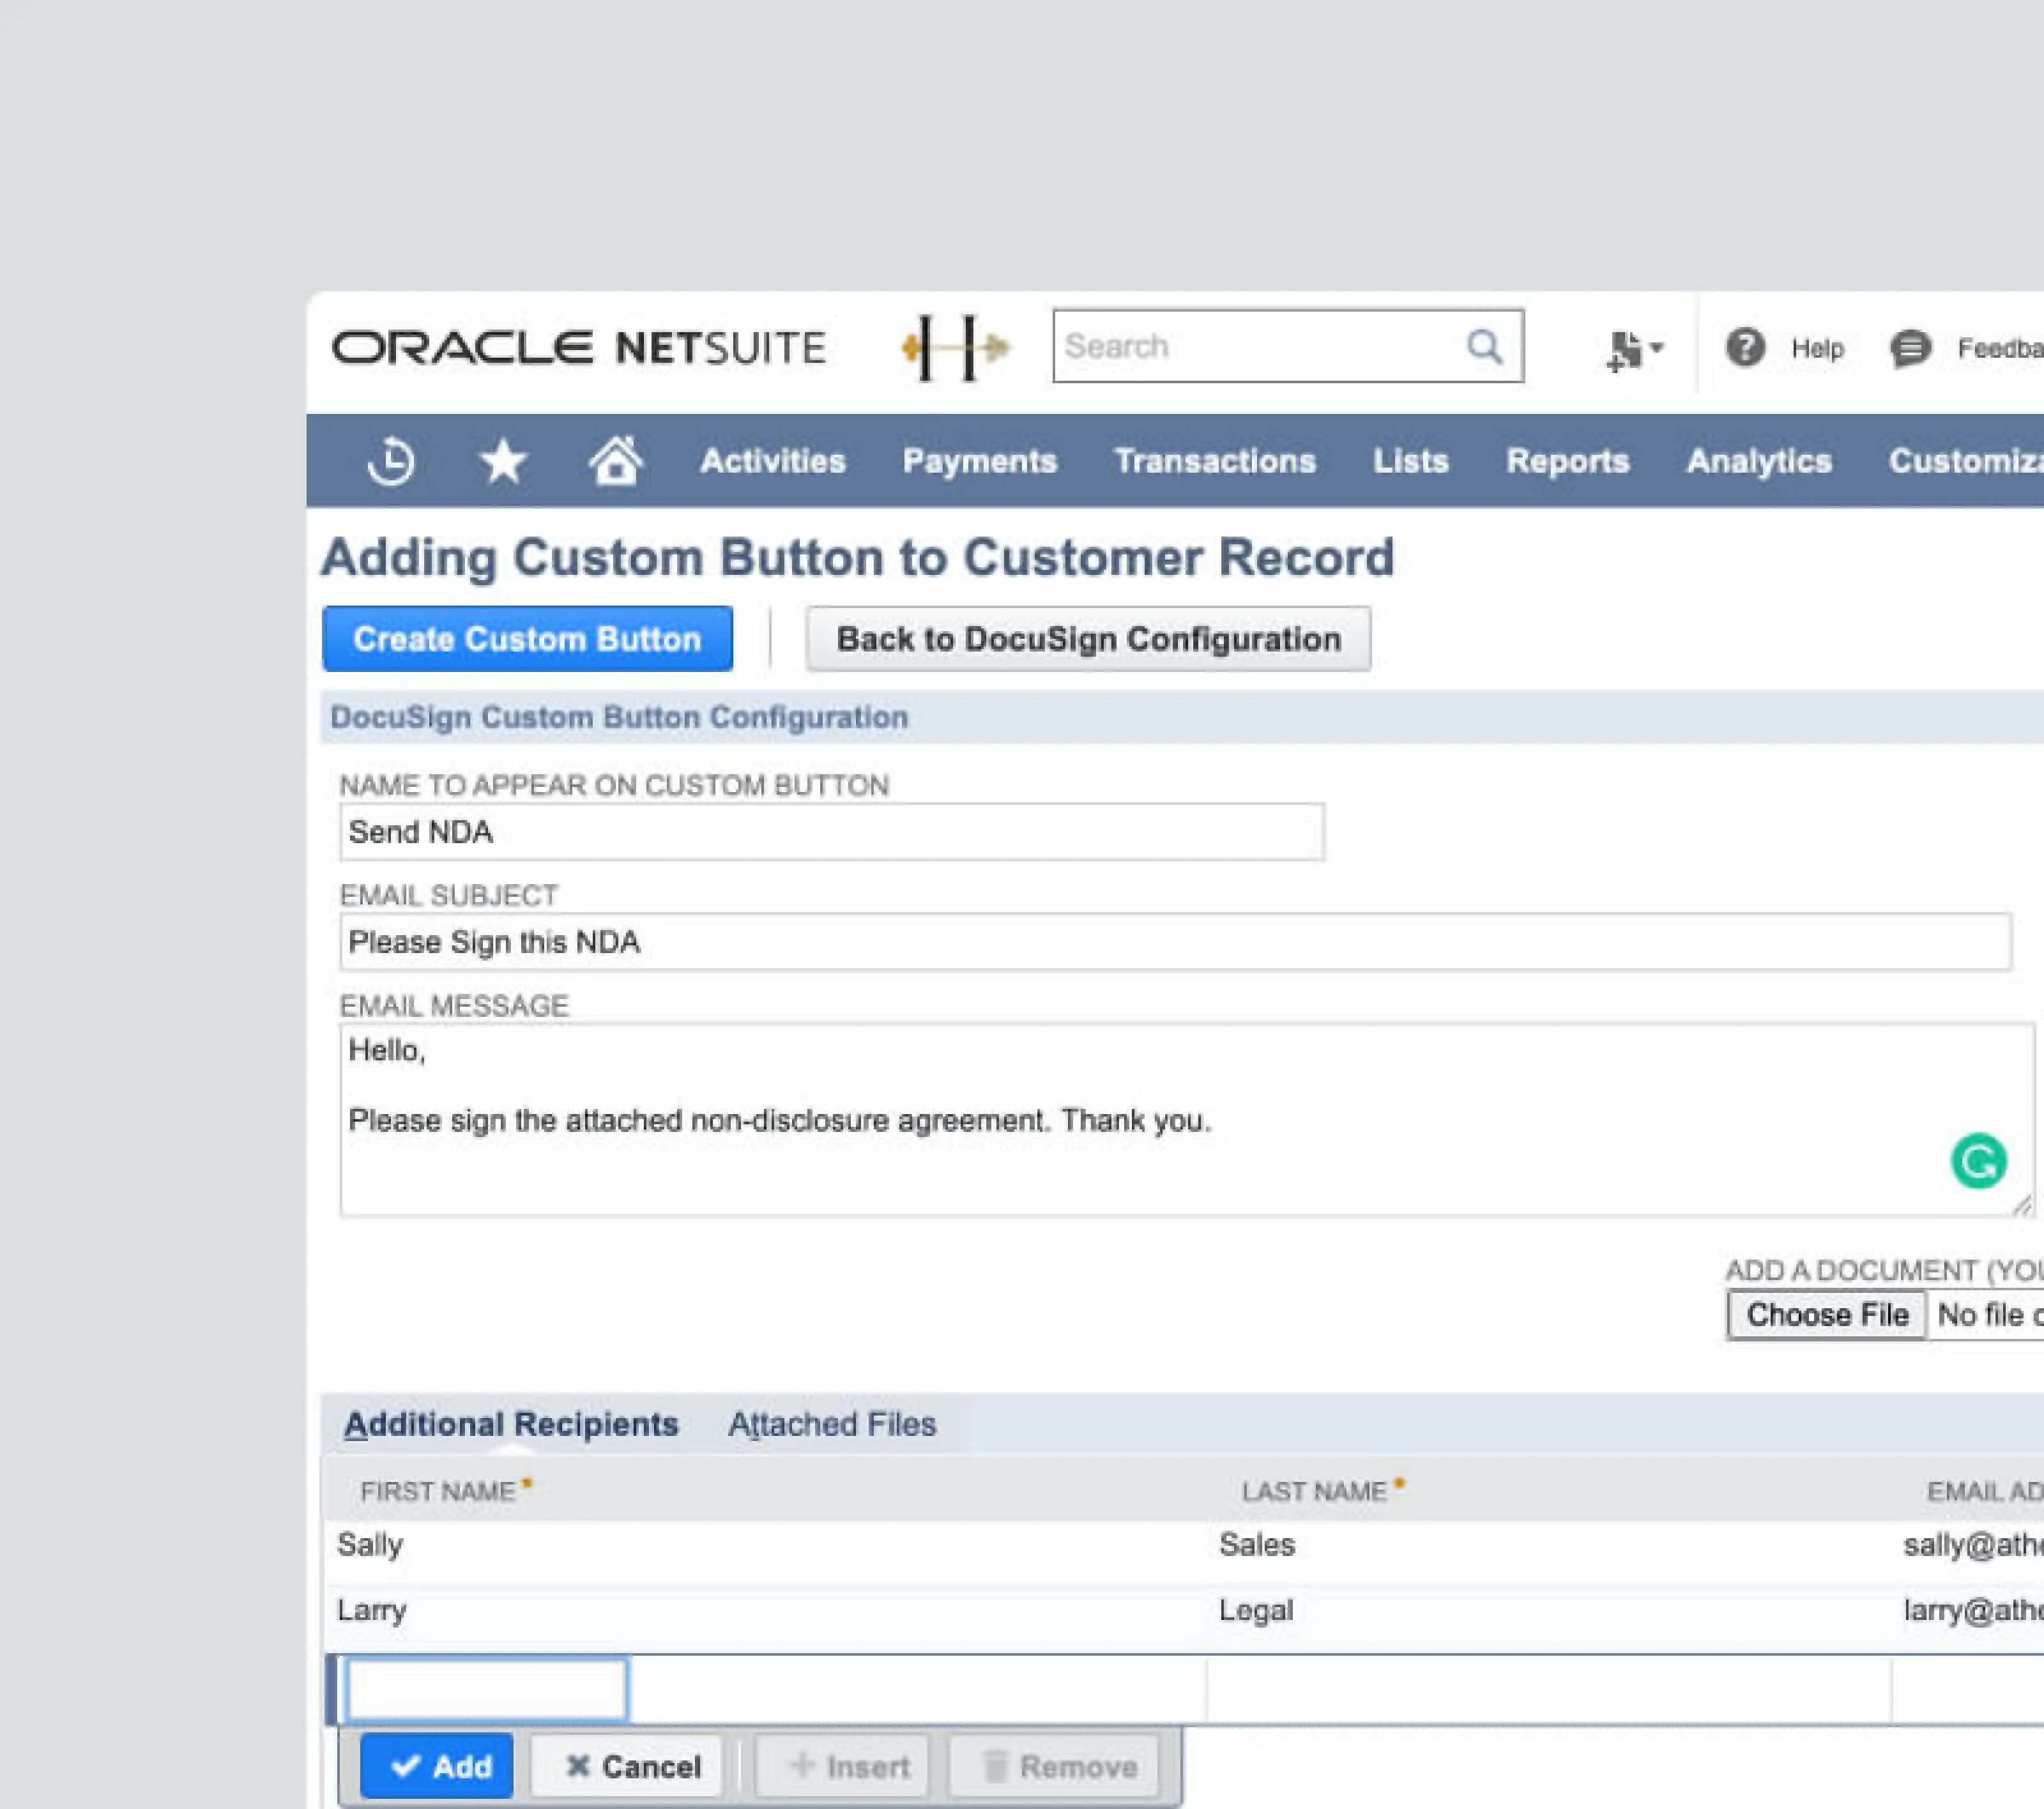 A product screenshot of Adding a Custom Button to Customer Record UI.